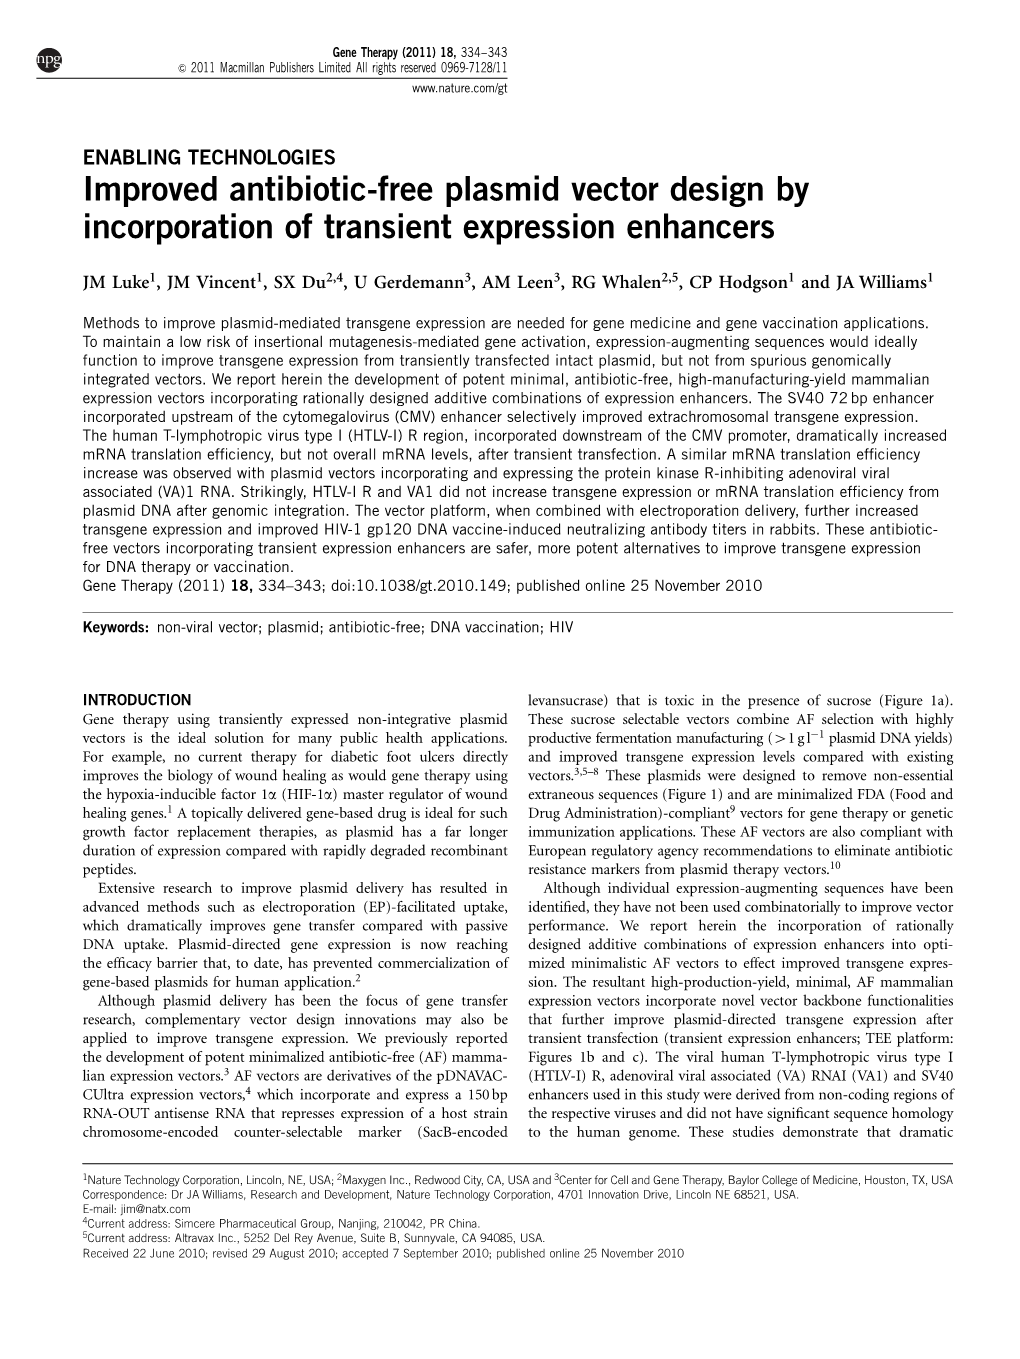 Improved Antibiotic-Free Plasmid Vector Design by Incorporation of Transient Expression Enhancers